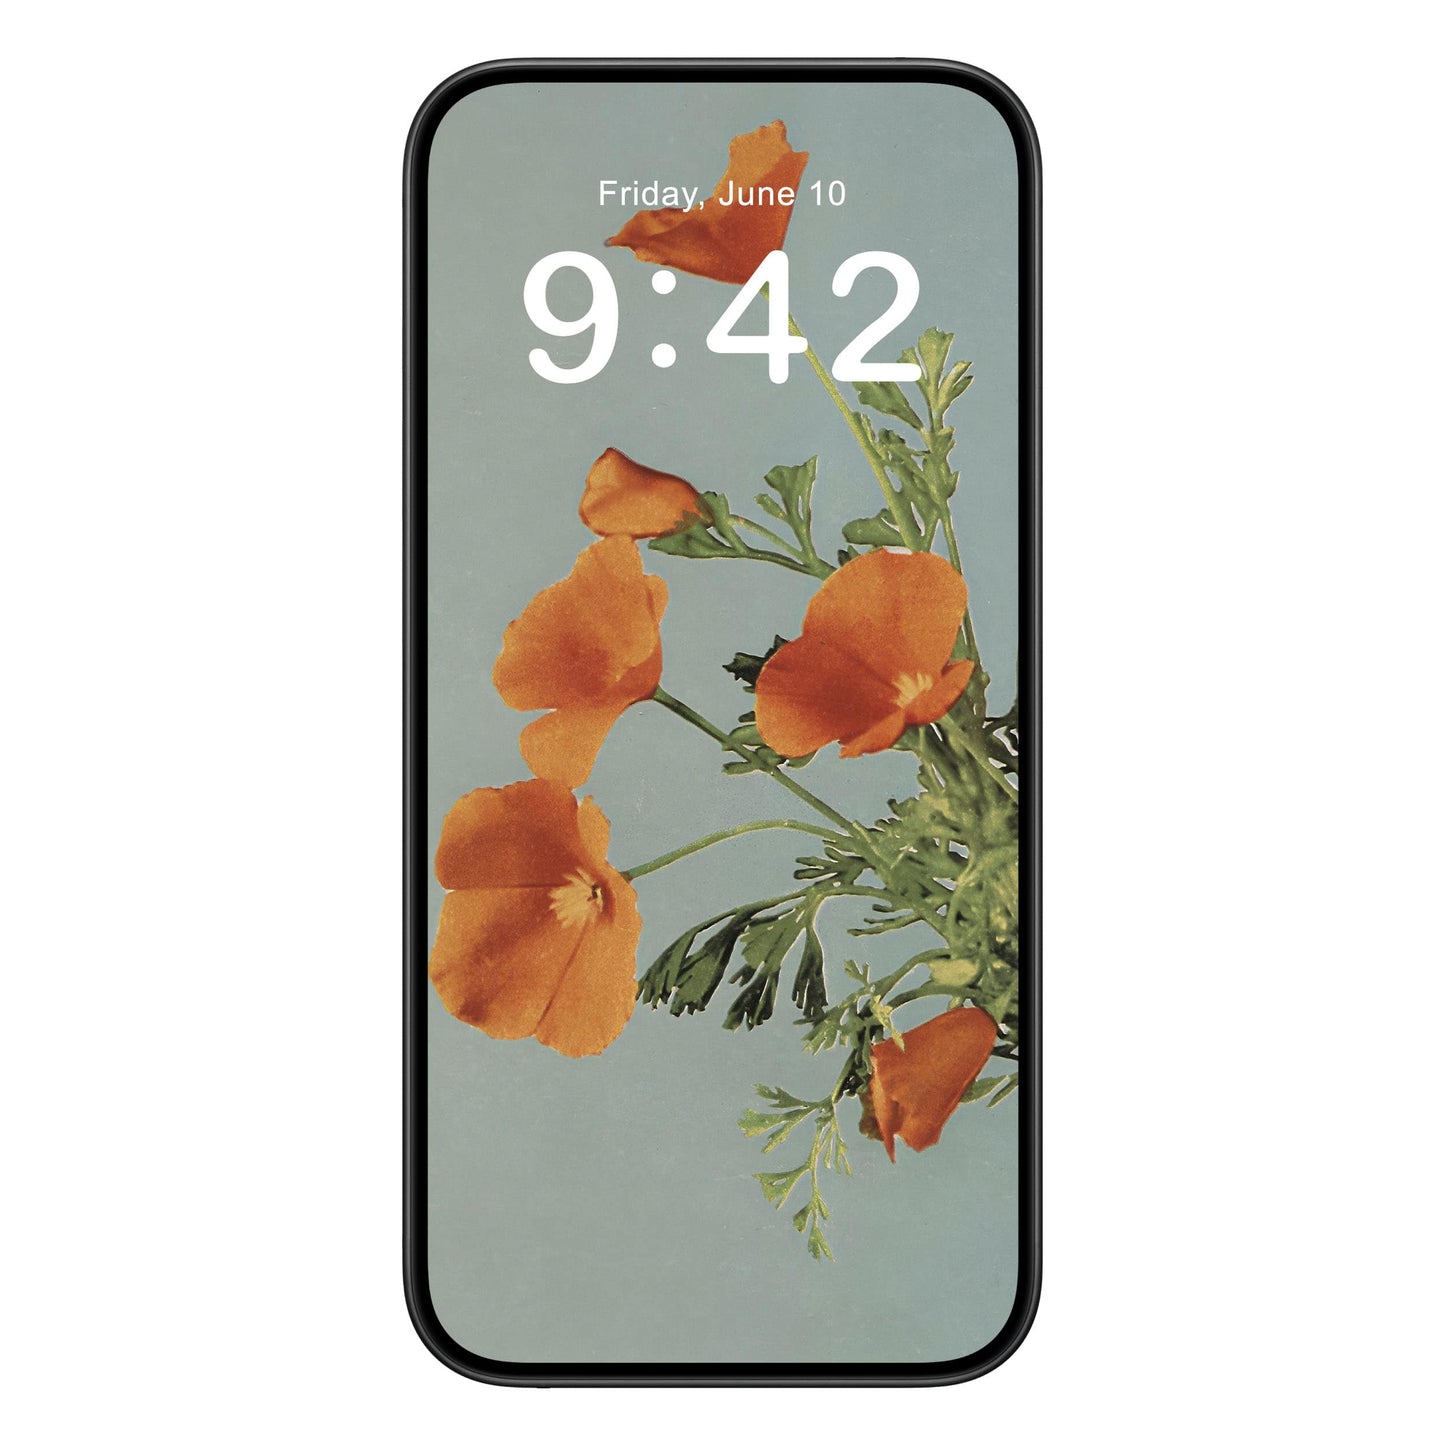 Vintage Floral phone wallpaper background with poppy flowers design shown on a phone lock screen, instant download available.